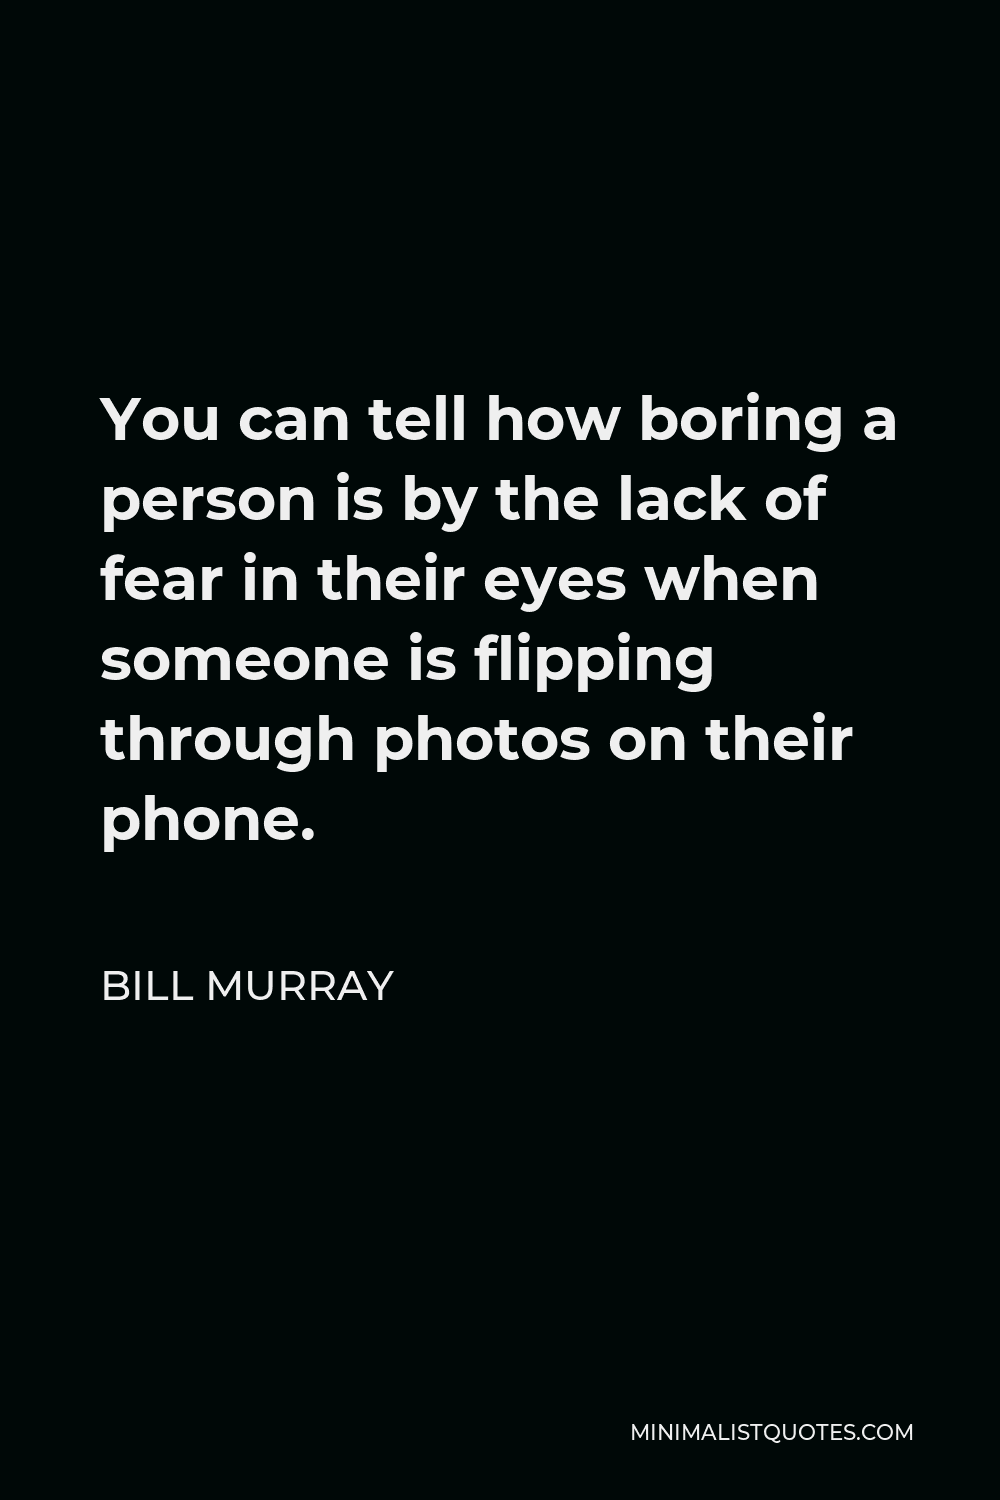 Bill Murray Quote - You can tell how boring a person is by the lack of fear in their eyes when someone is flipping through photos on their phone.